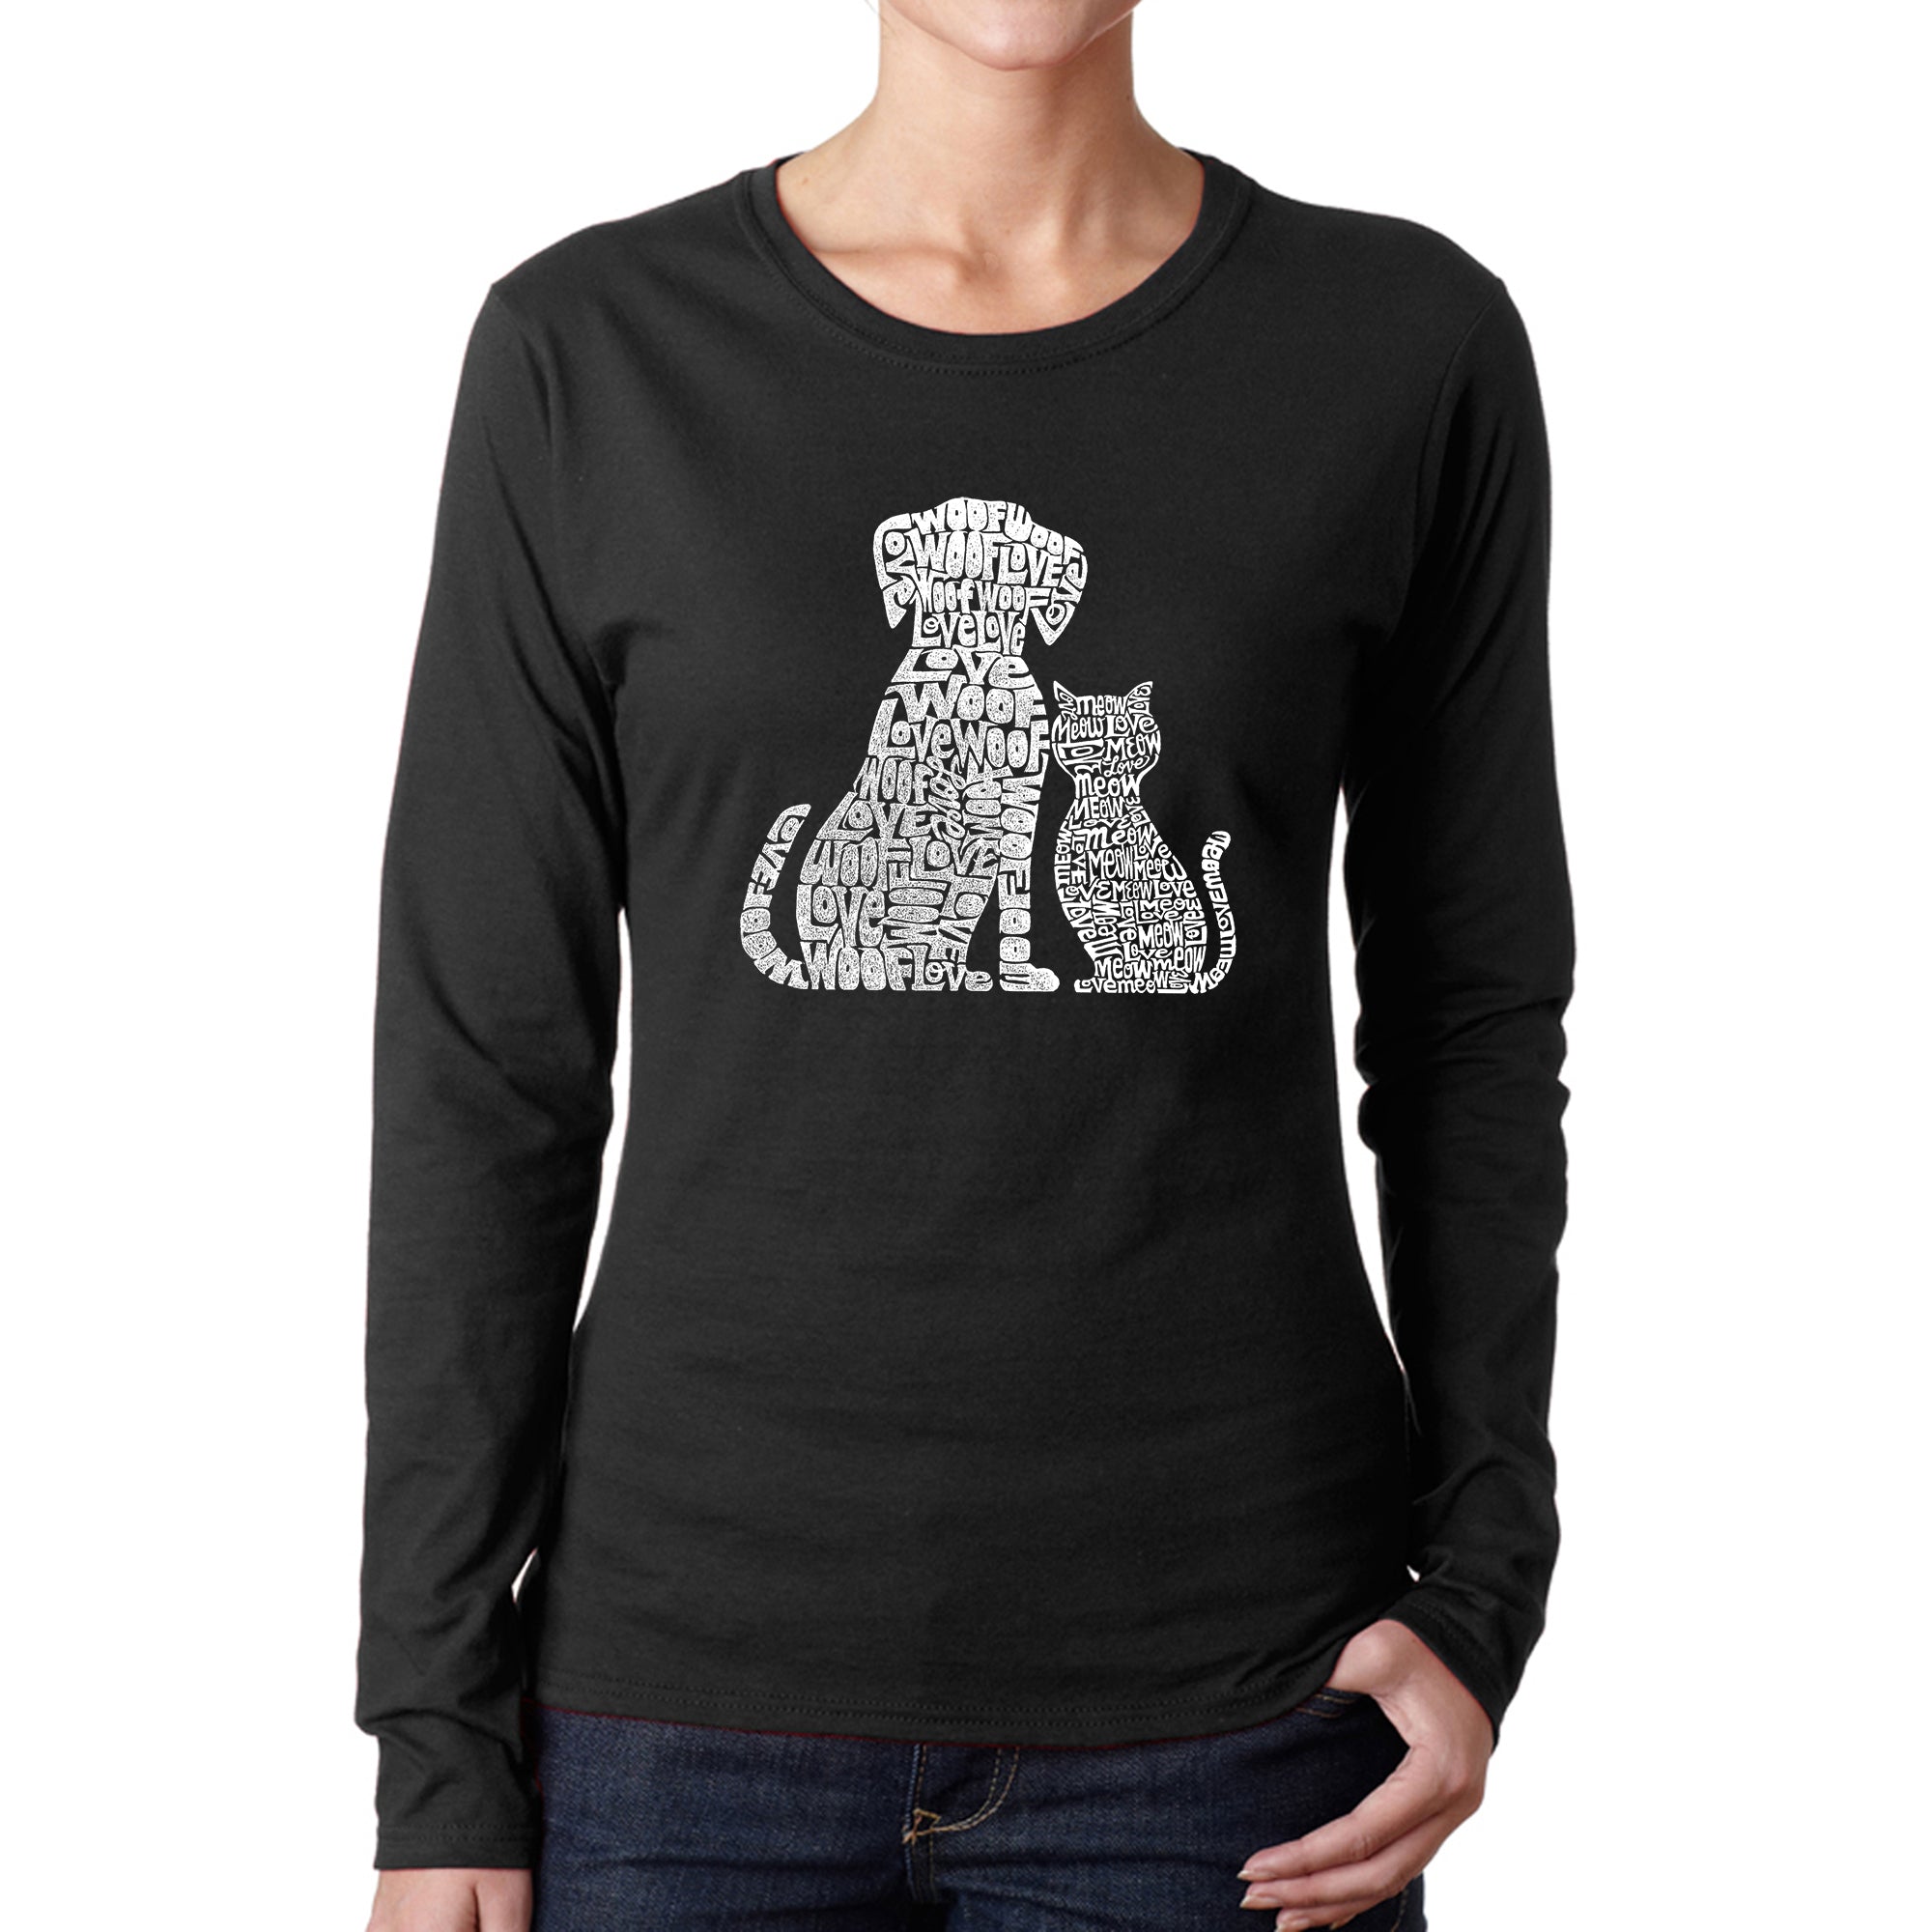 Dogs And Cats - Women's Word Art Long Sleeve T-Shirt - Black - Large